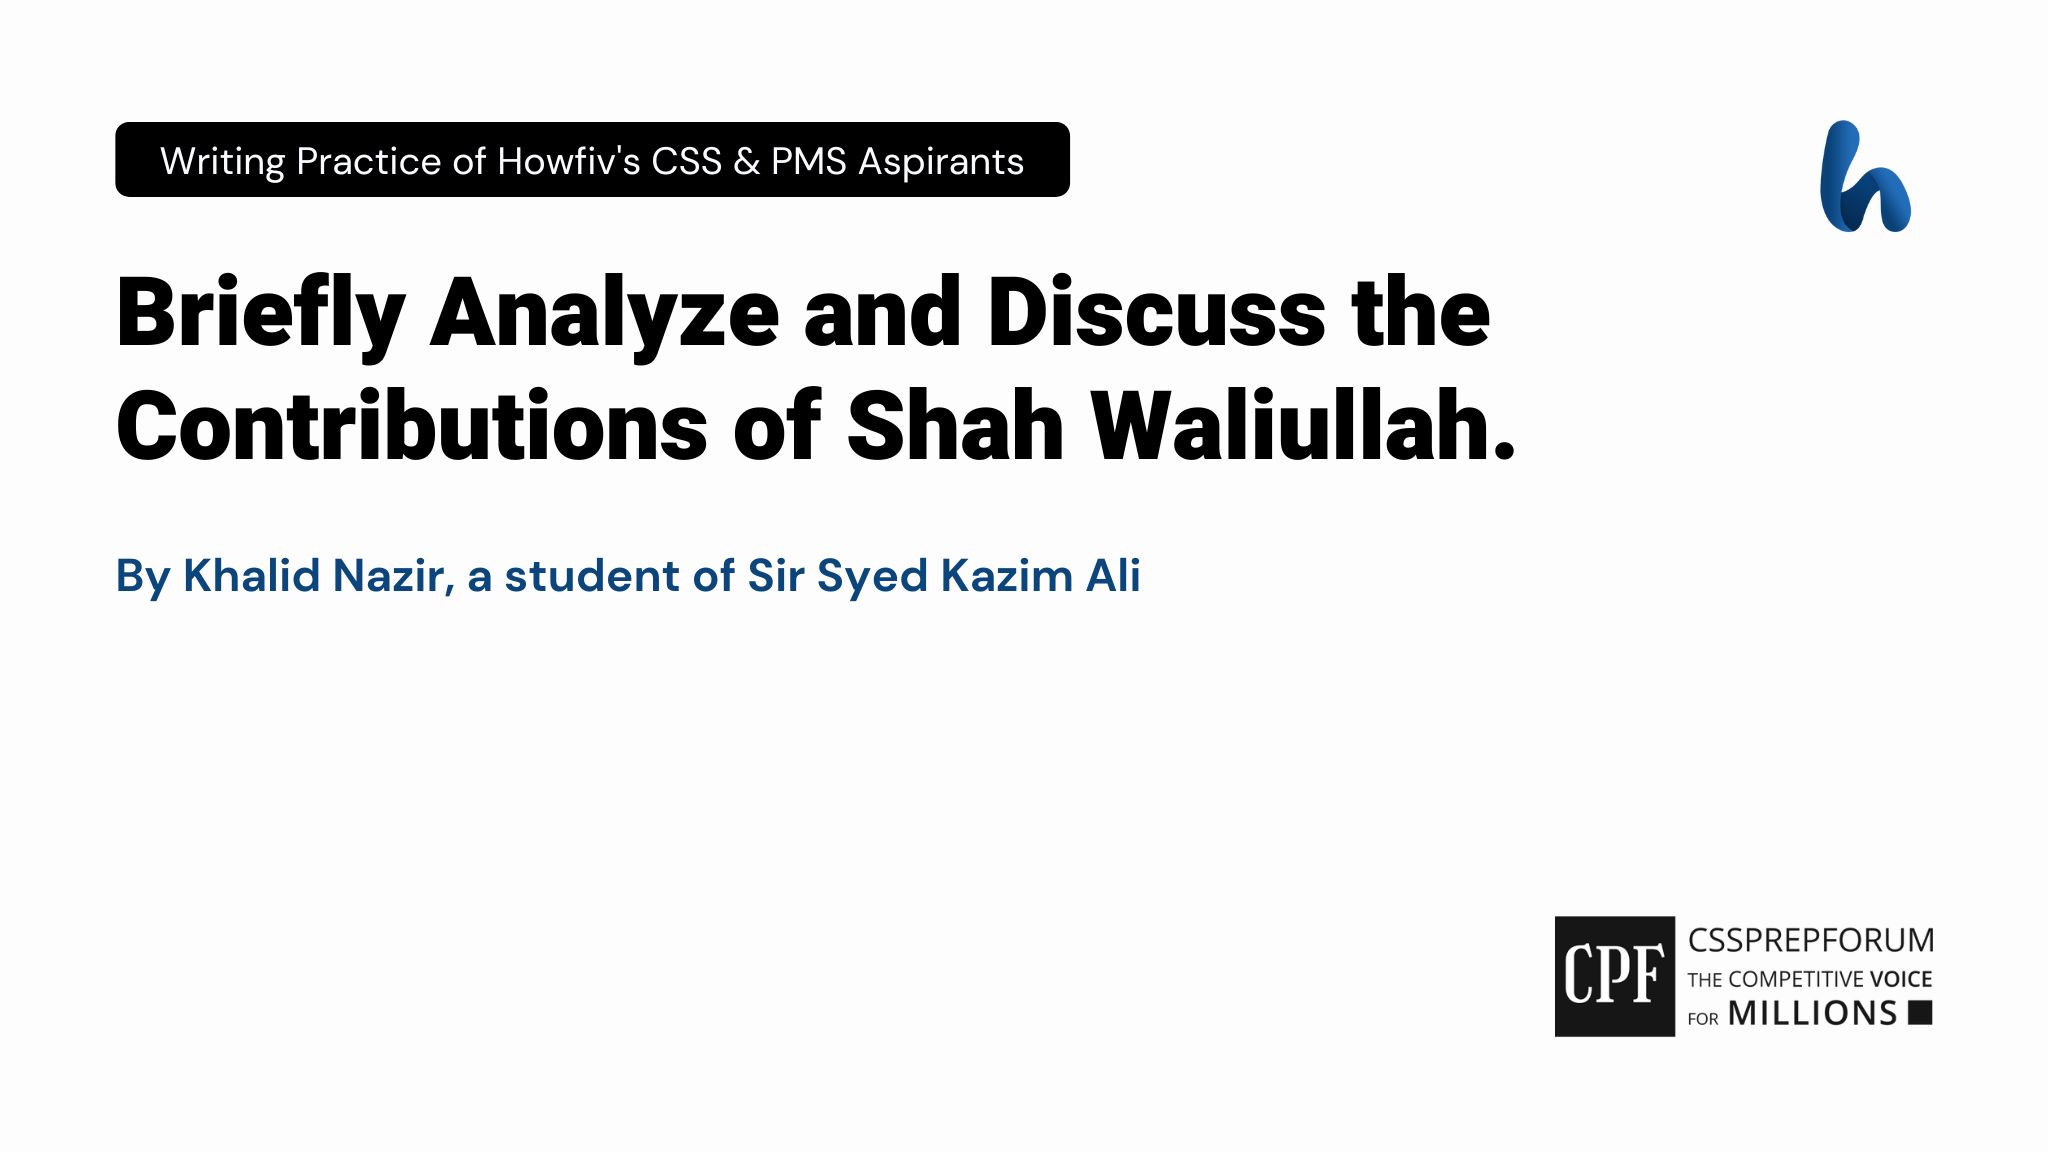 Briefly Analyze and Discuss the Contributions of Shah Waliullah